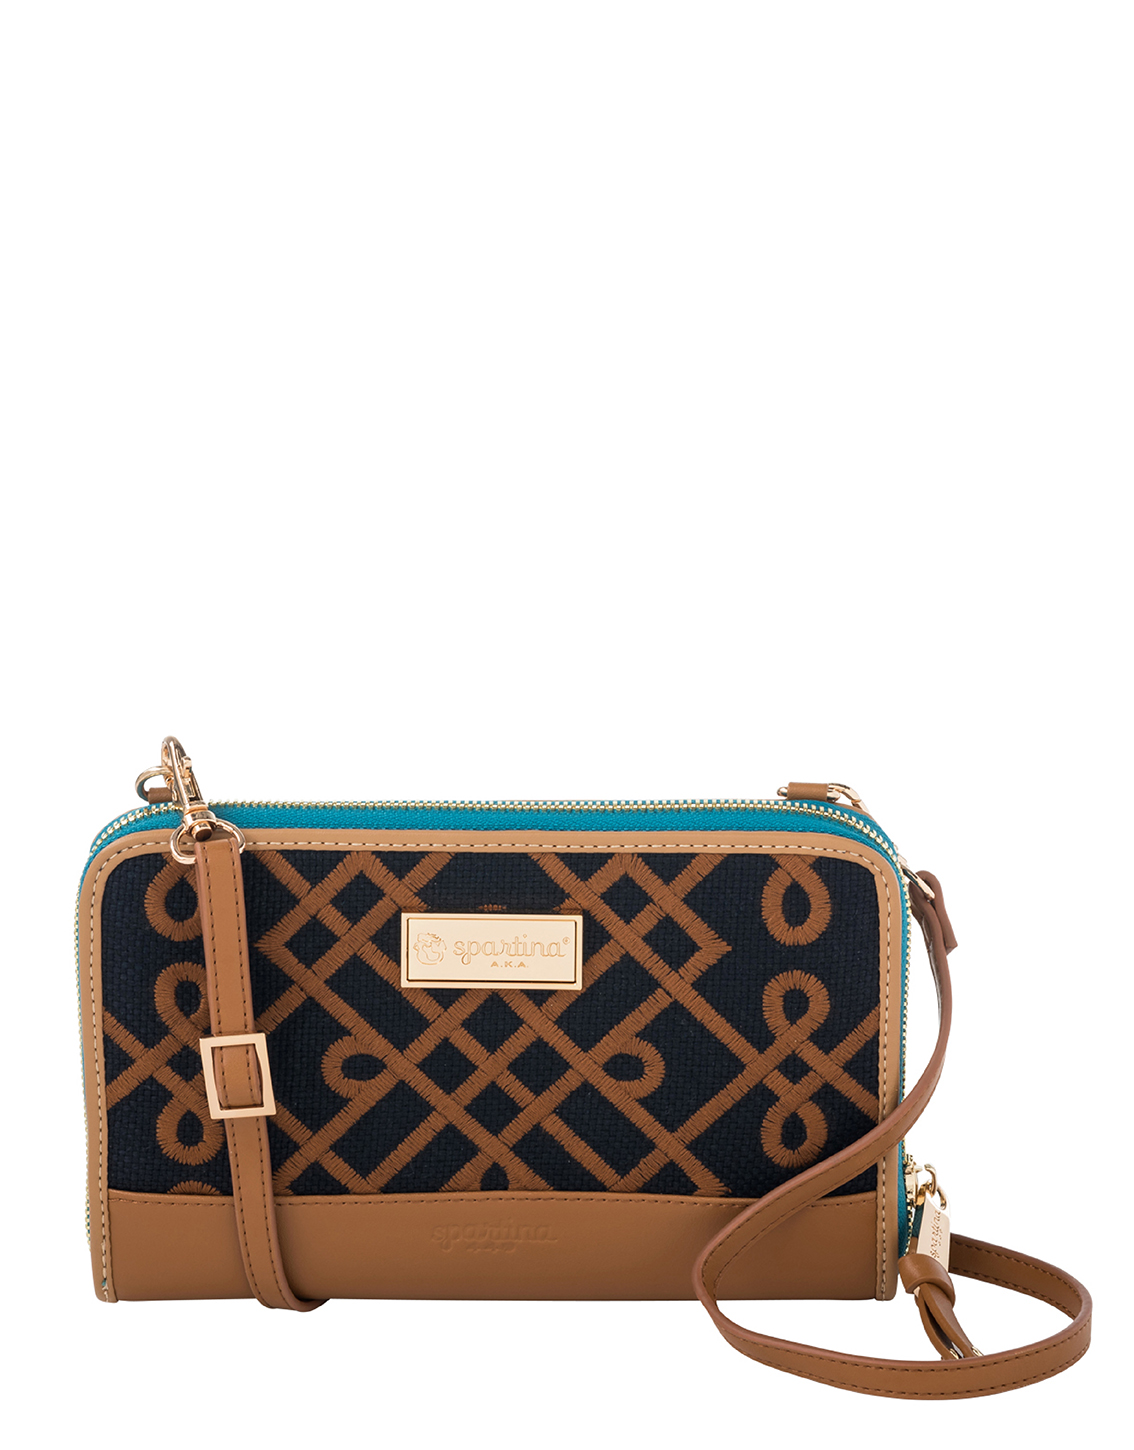 Spartina 449 Mareena AKA Monogram All-in-One Hipster by Spartina 449 ...